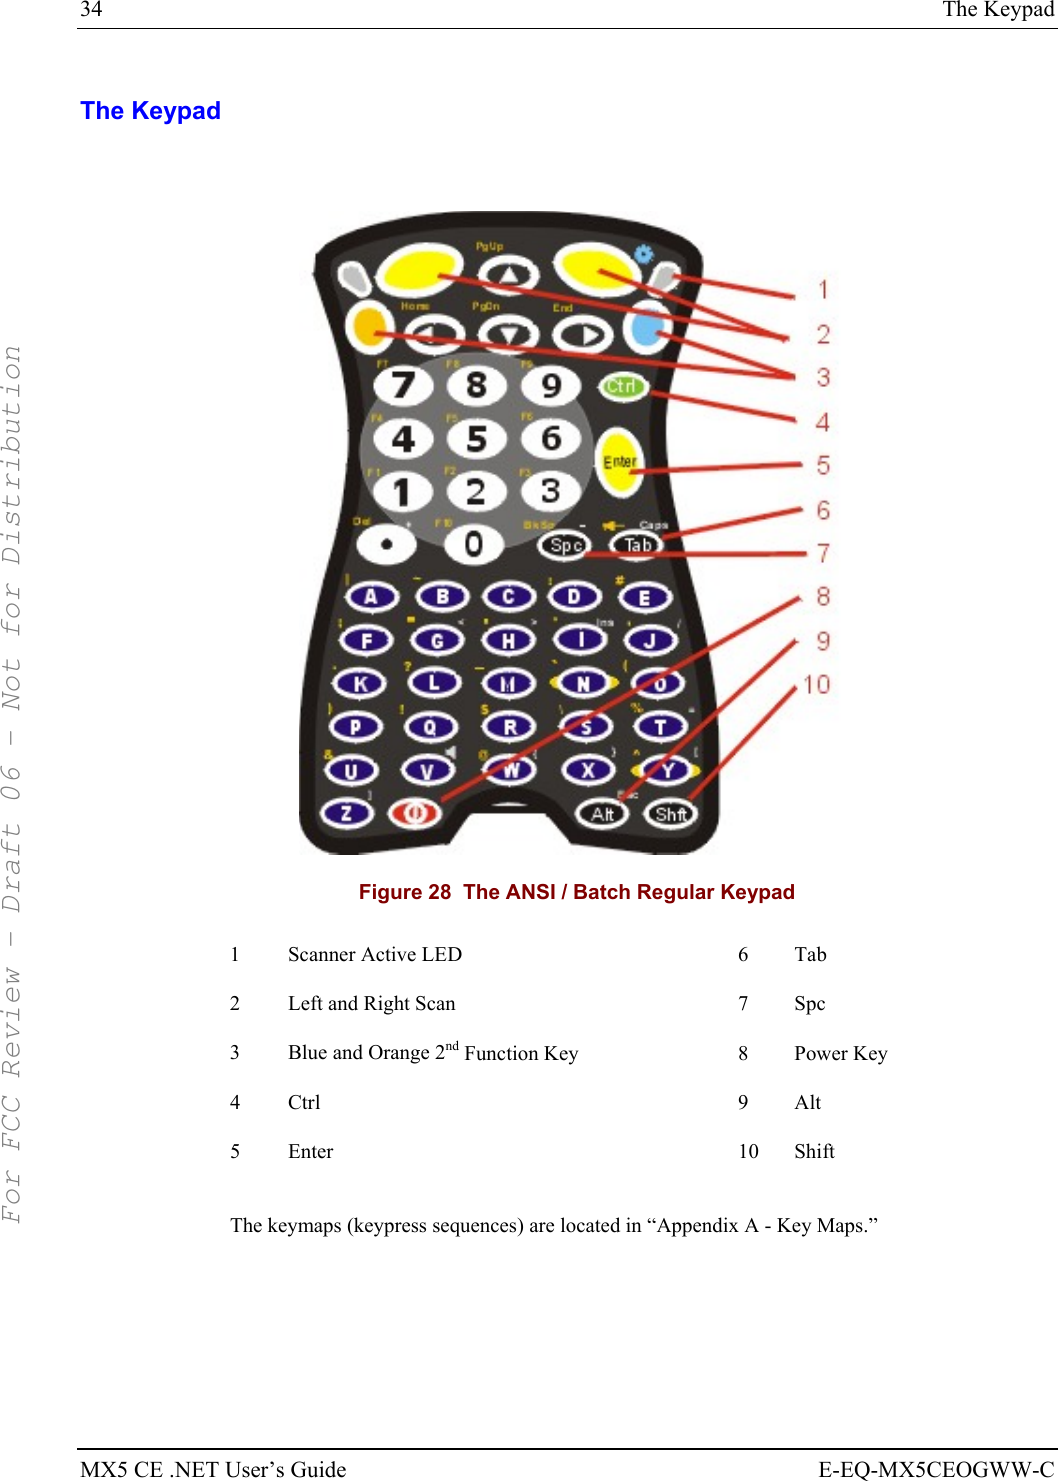 34  The Keypad MX5 CE .NET User’s Guide  E-EQ-MX5CEOGWW-C The Keypad    Figure 28  The ANSI / Batch Regular Keypad 1  Scanner Active LED  6  Tab 2  Left and Right Scan  7  Spc 3  Blue and Orange 2nd Function Key  8  Power Key 4 Ctrl  9 Alt 5 Enter  10 Shift  The keymaps (keypress sequences) are located in “Appendix A - Key Maps.” For FCC Review - Draft 06 - Not for Distribution